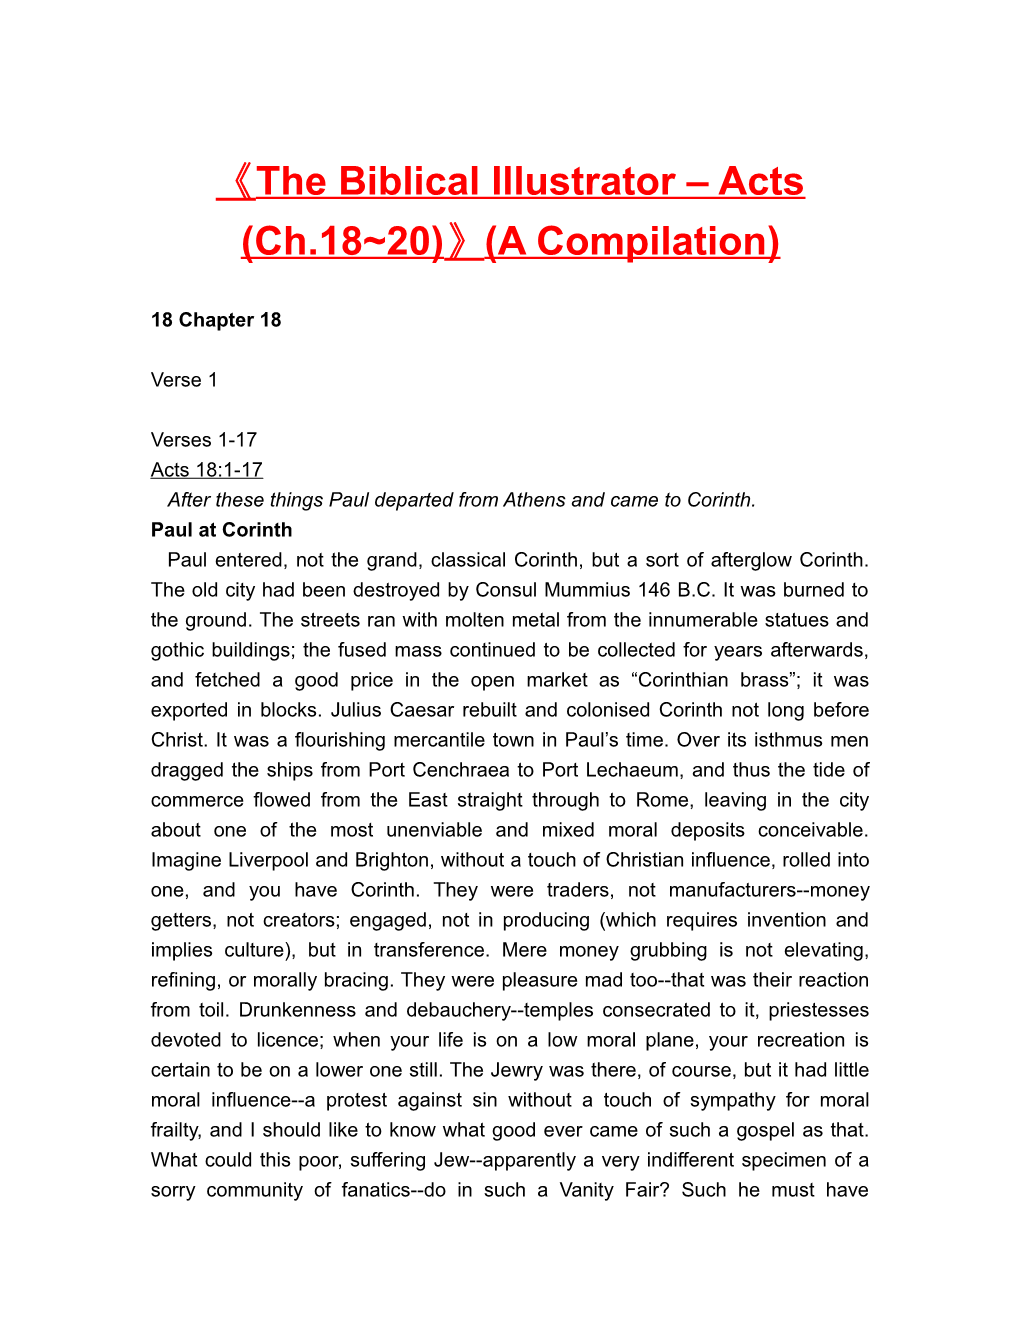 The Biblical Illustrator Acts (Ch.18 20) (A Compilation)